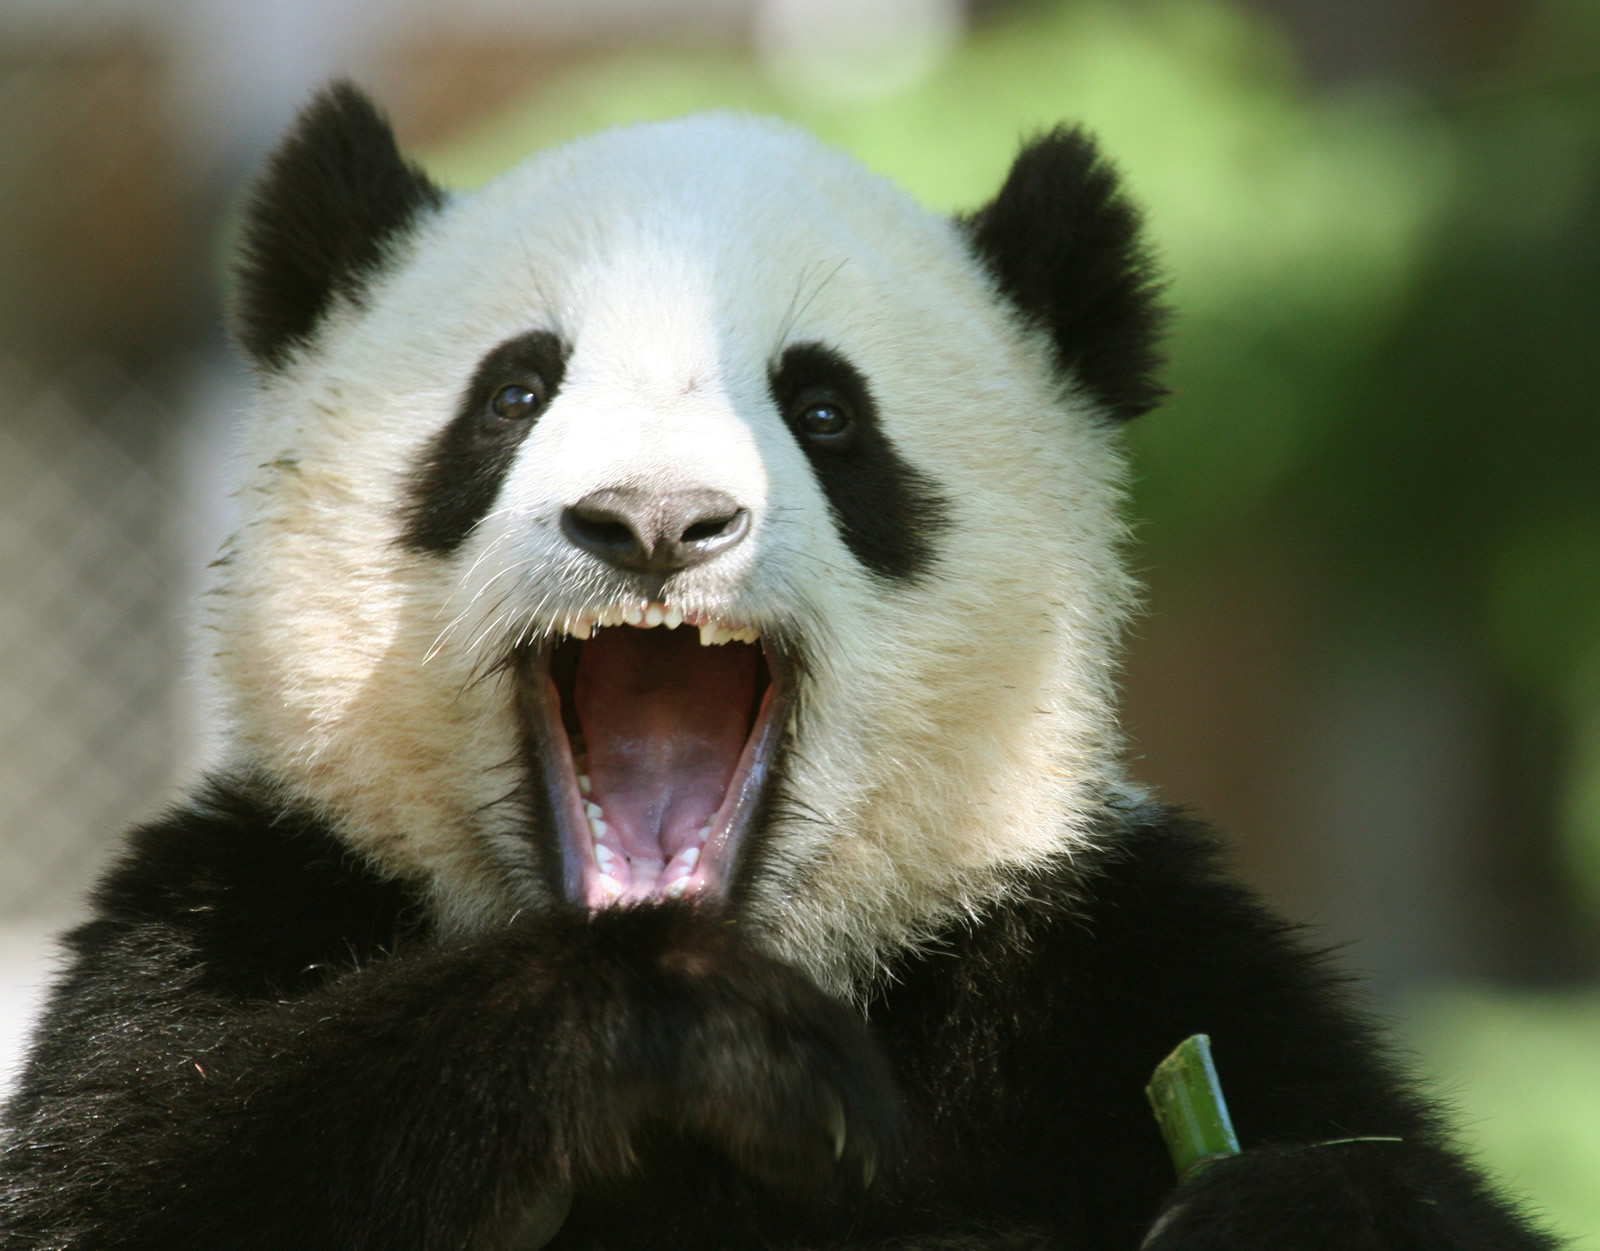 How Google’s Panda 4.0 Update Affects Personal Search Results